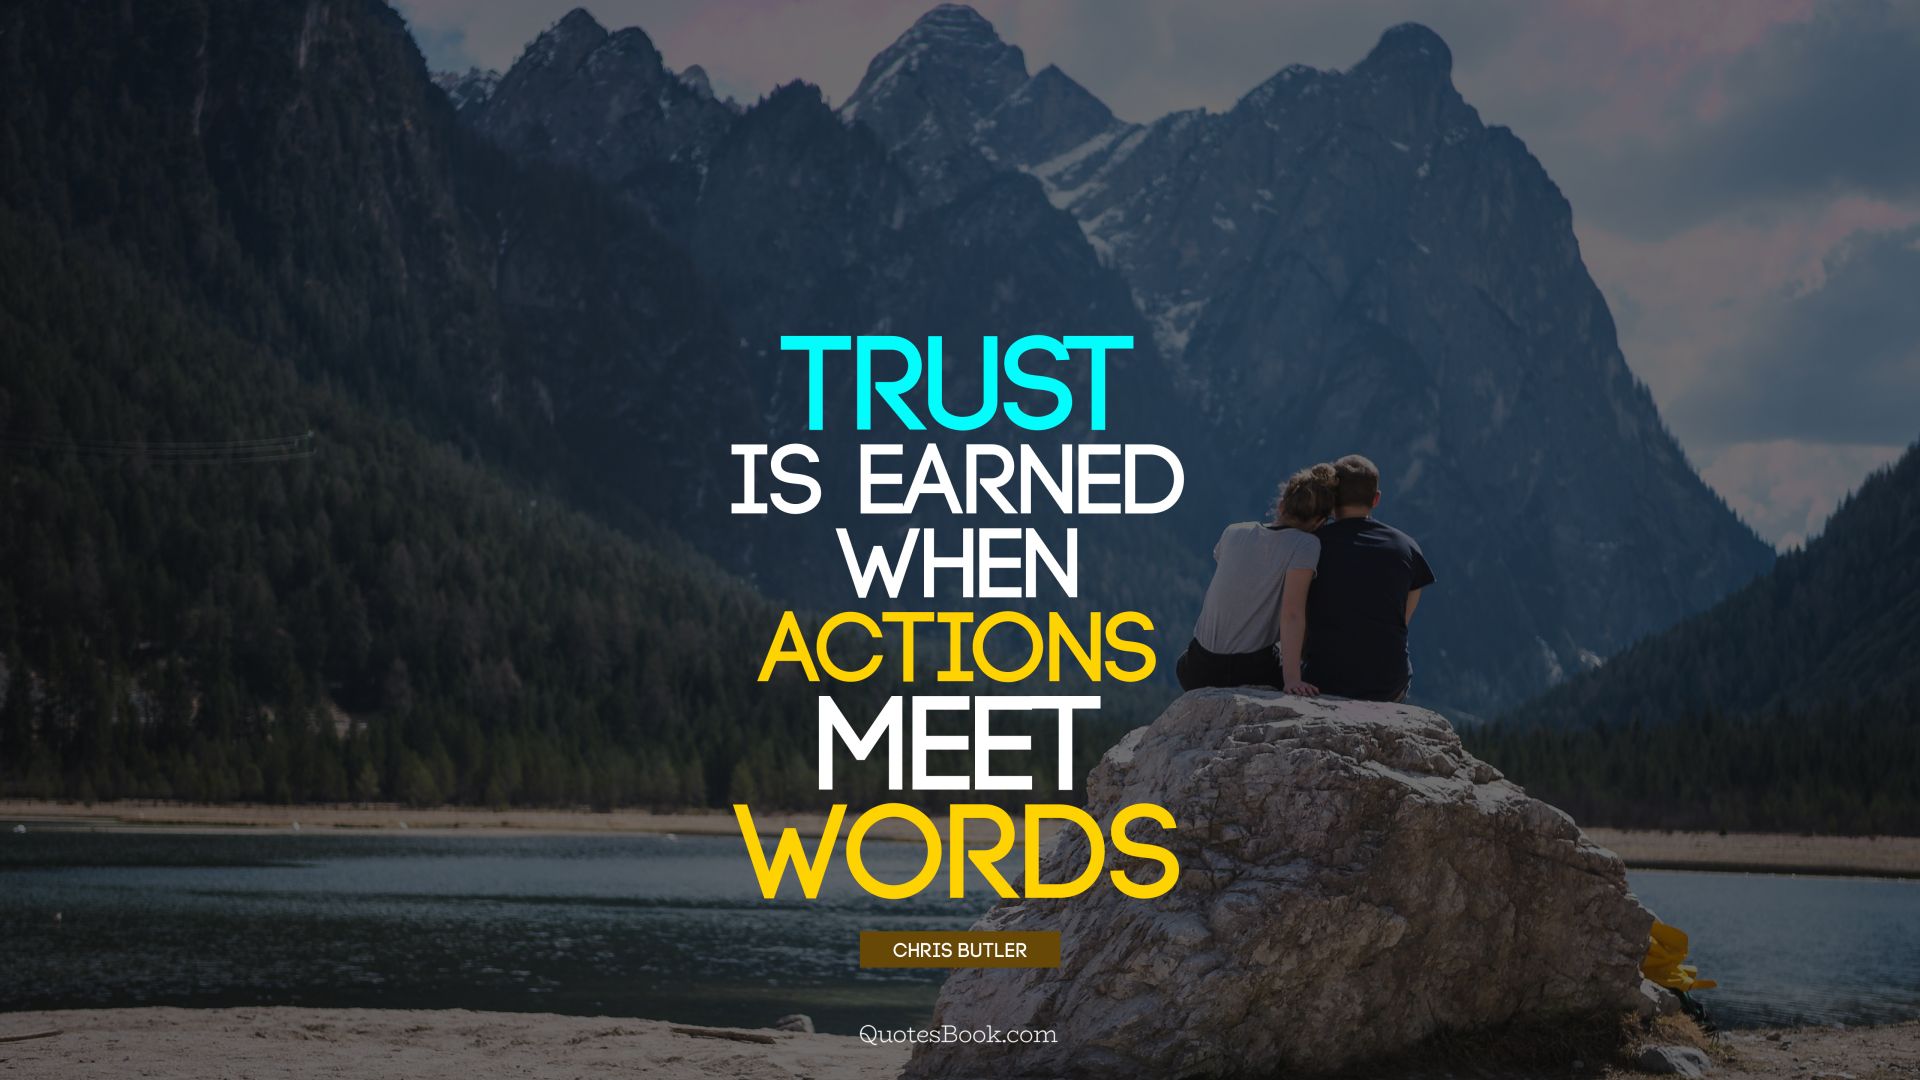 Trust is earned when actions meet words. - Quote by Chris Butler